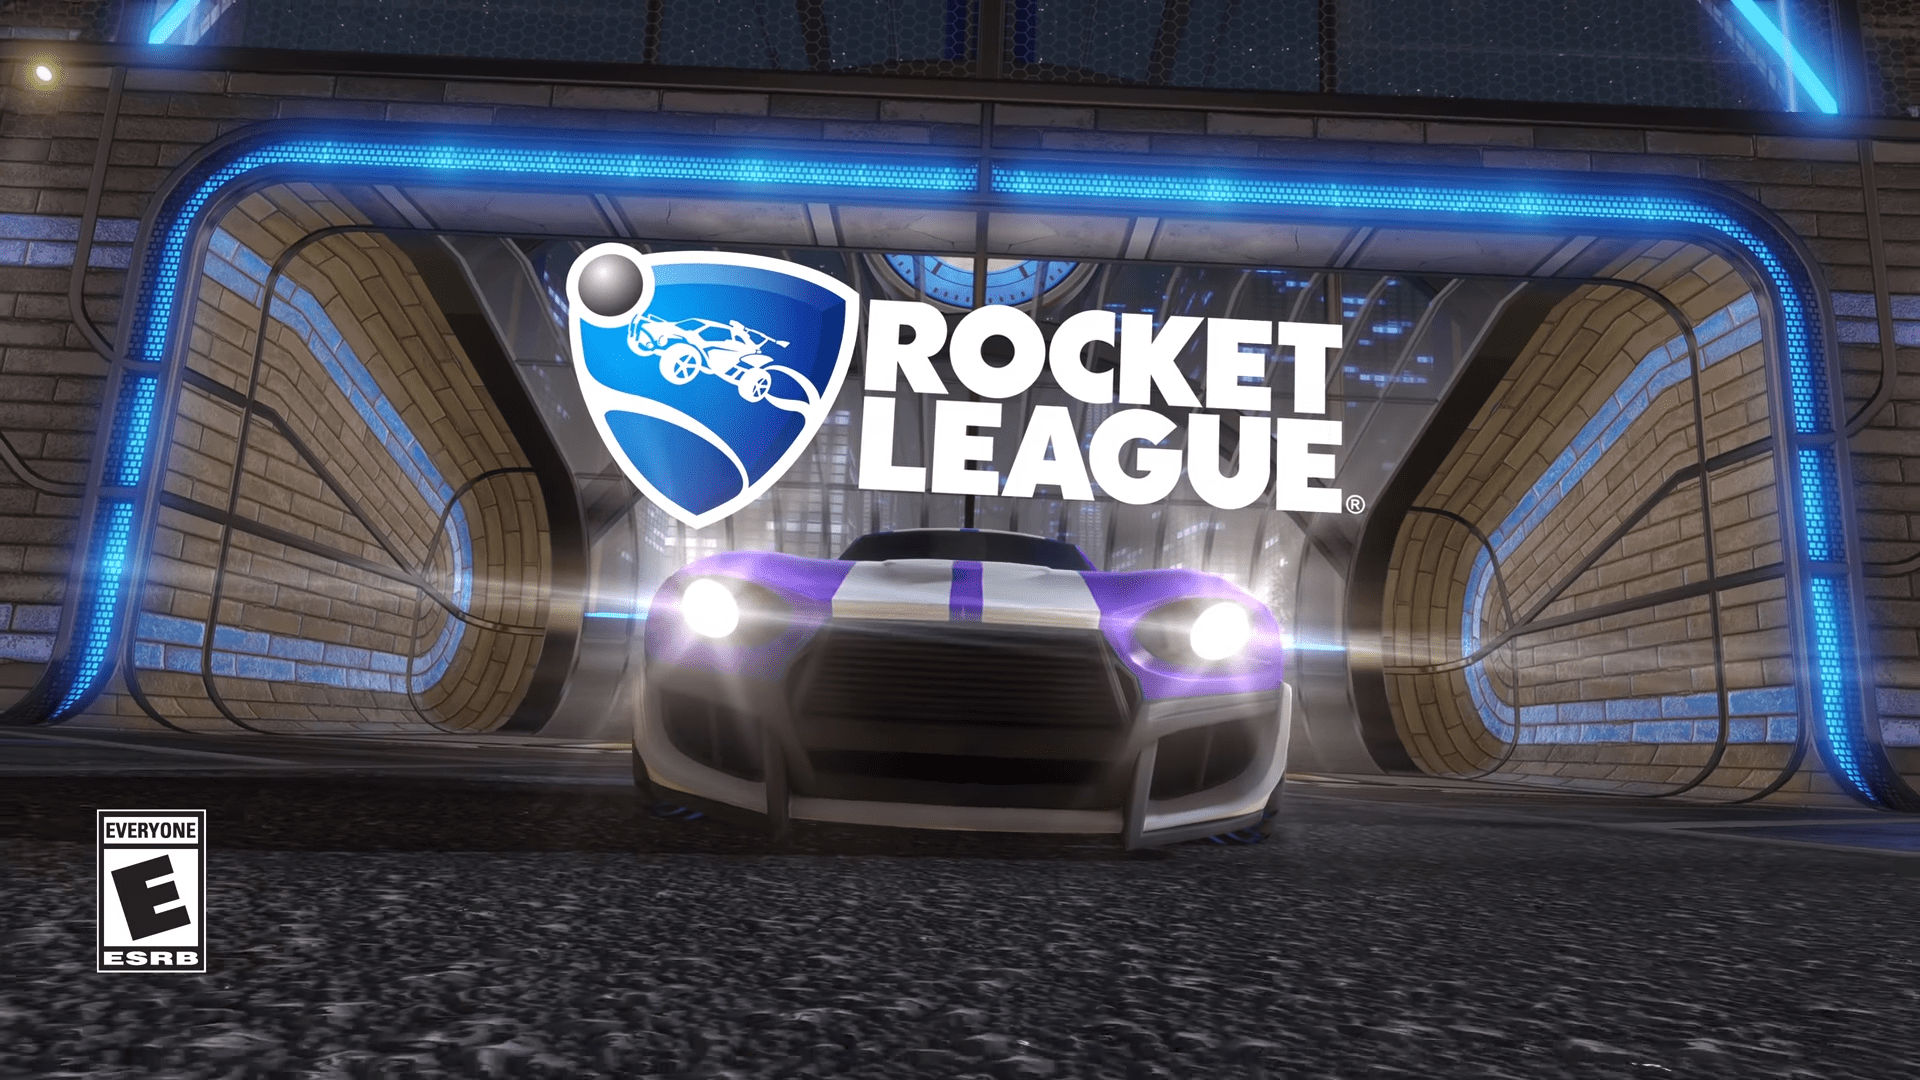 ‘Rocket League’ Offering Double XP Weekend Starting On November 27 To Close Rocket Pass 4